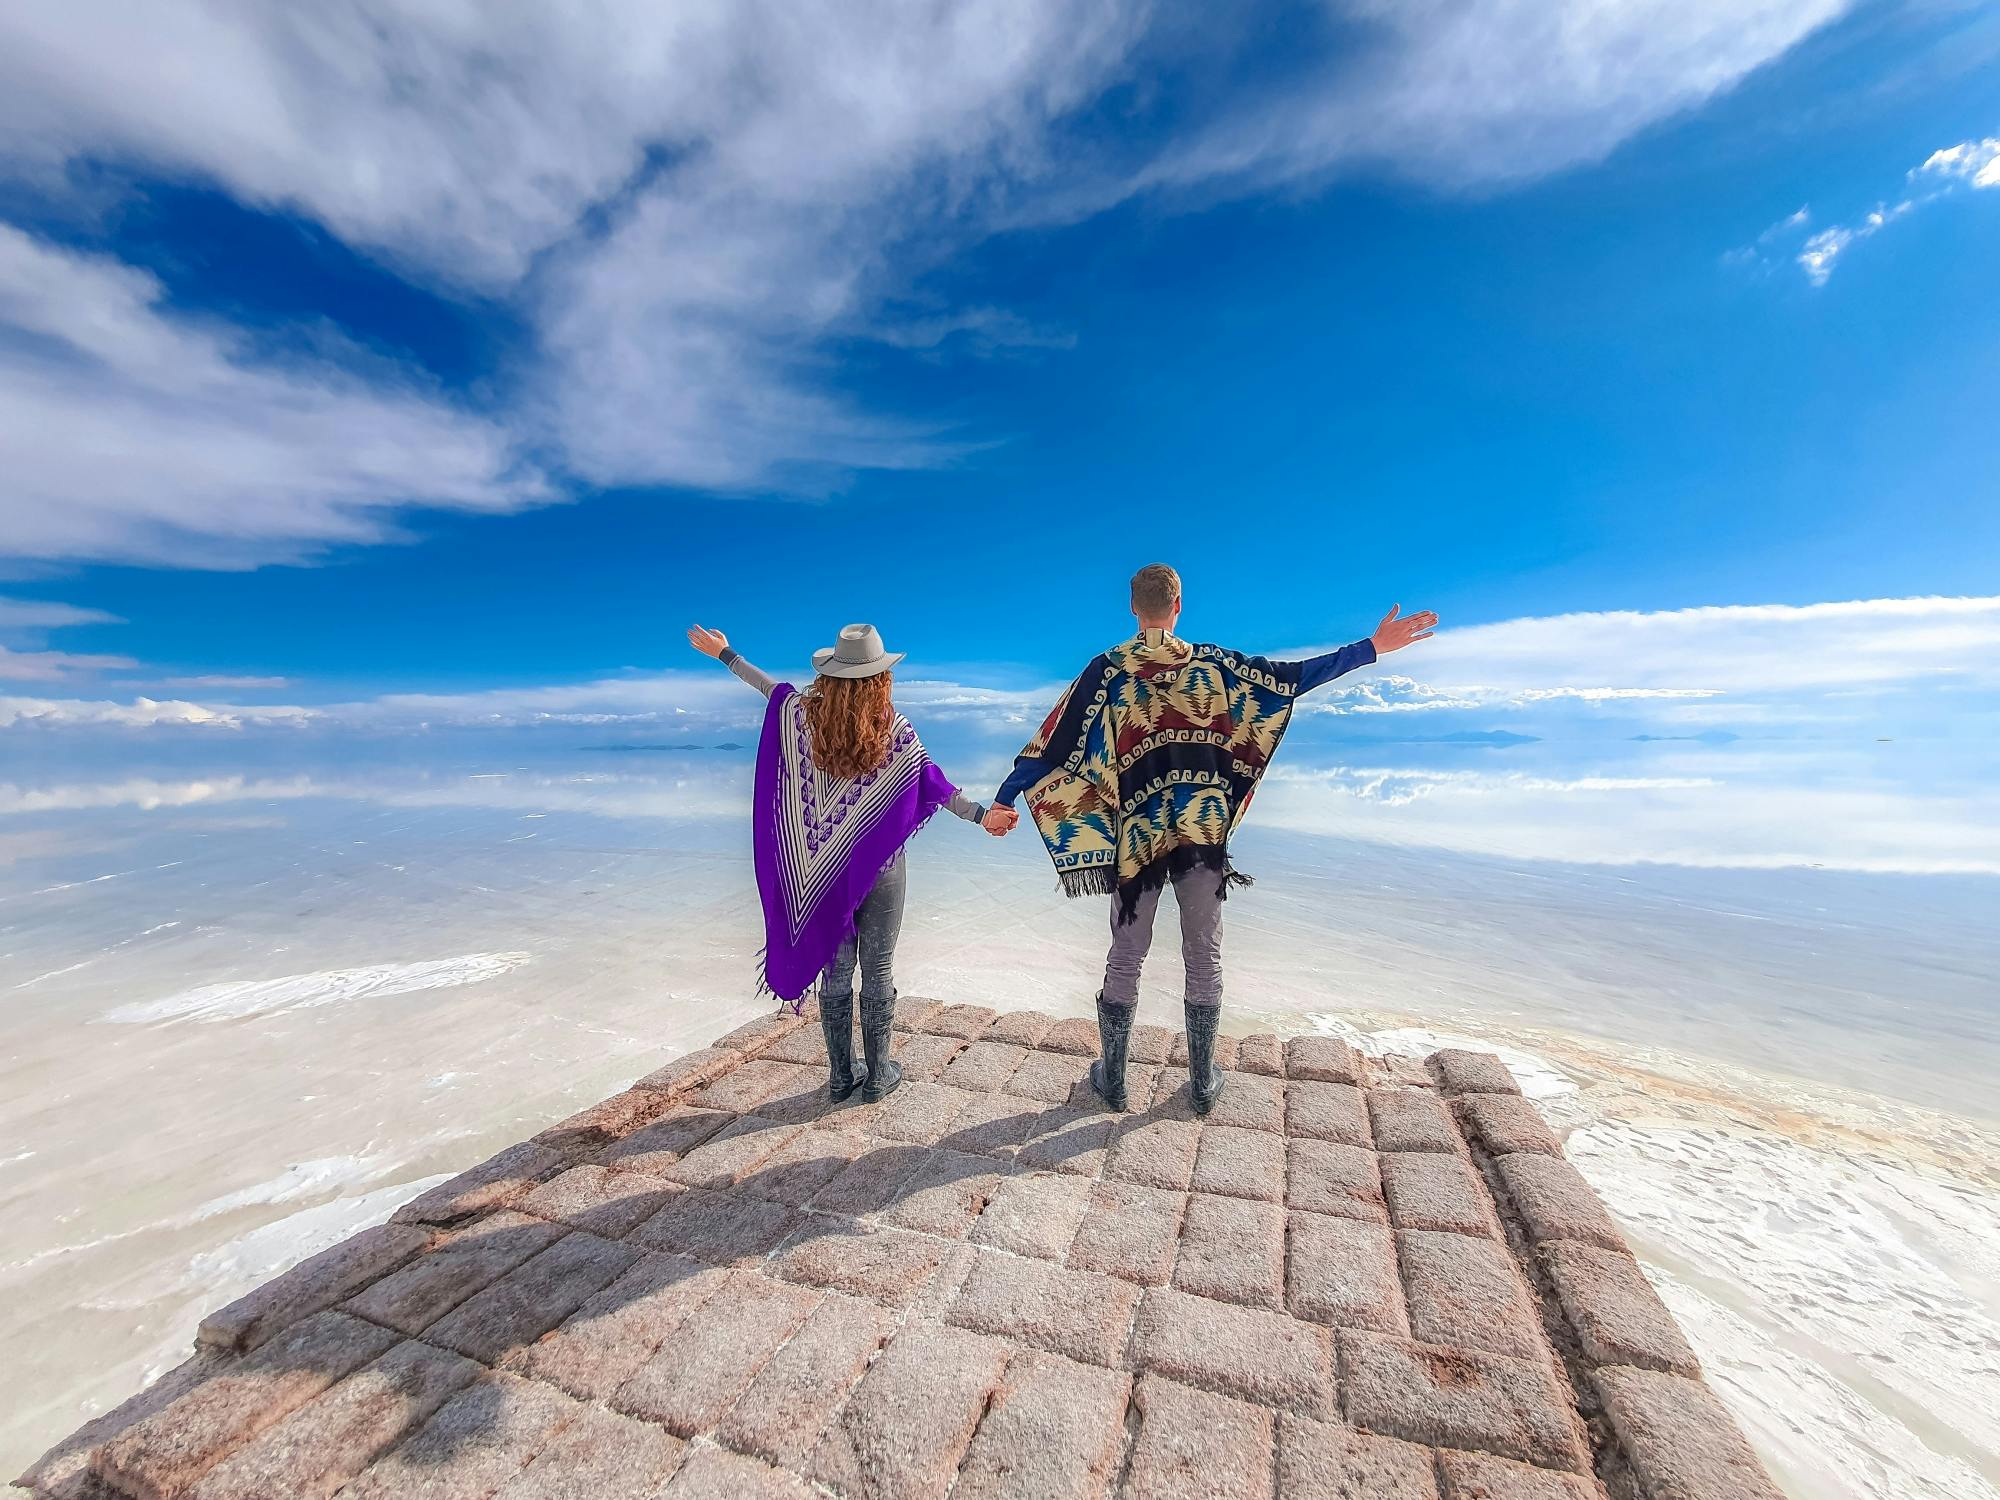 Full-day guided excursion to Salt Flats from Uyuni